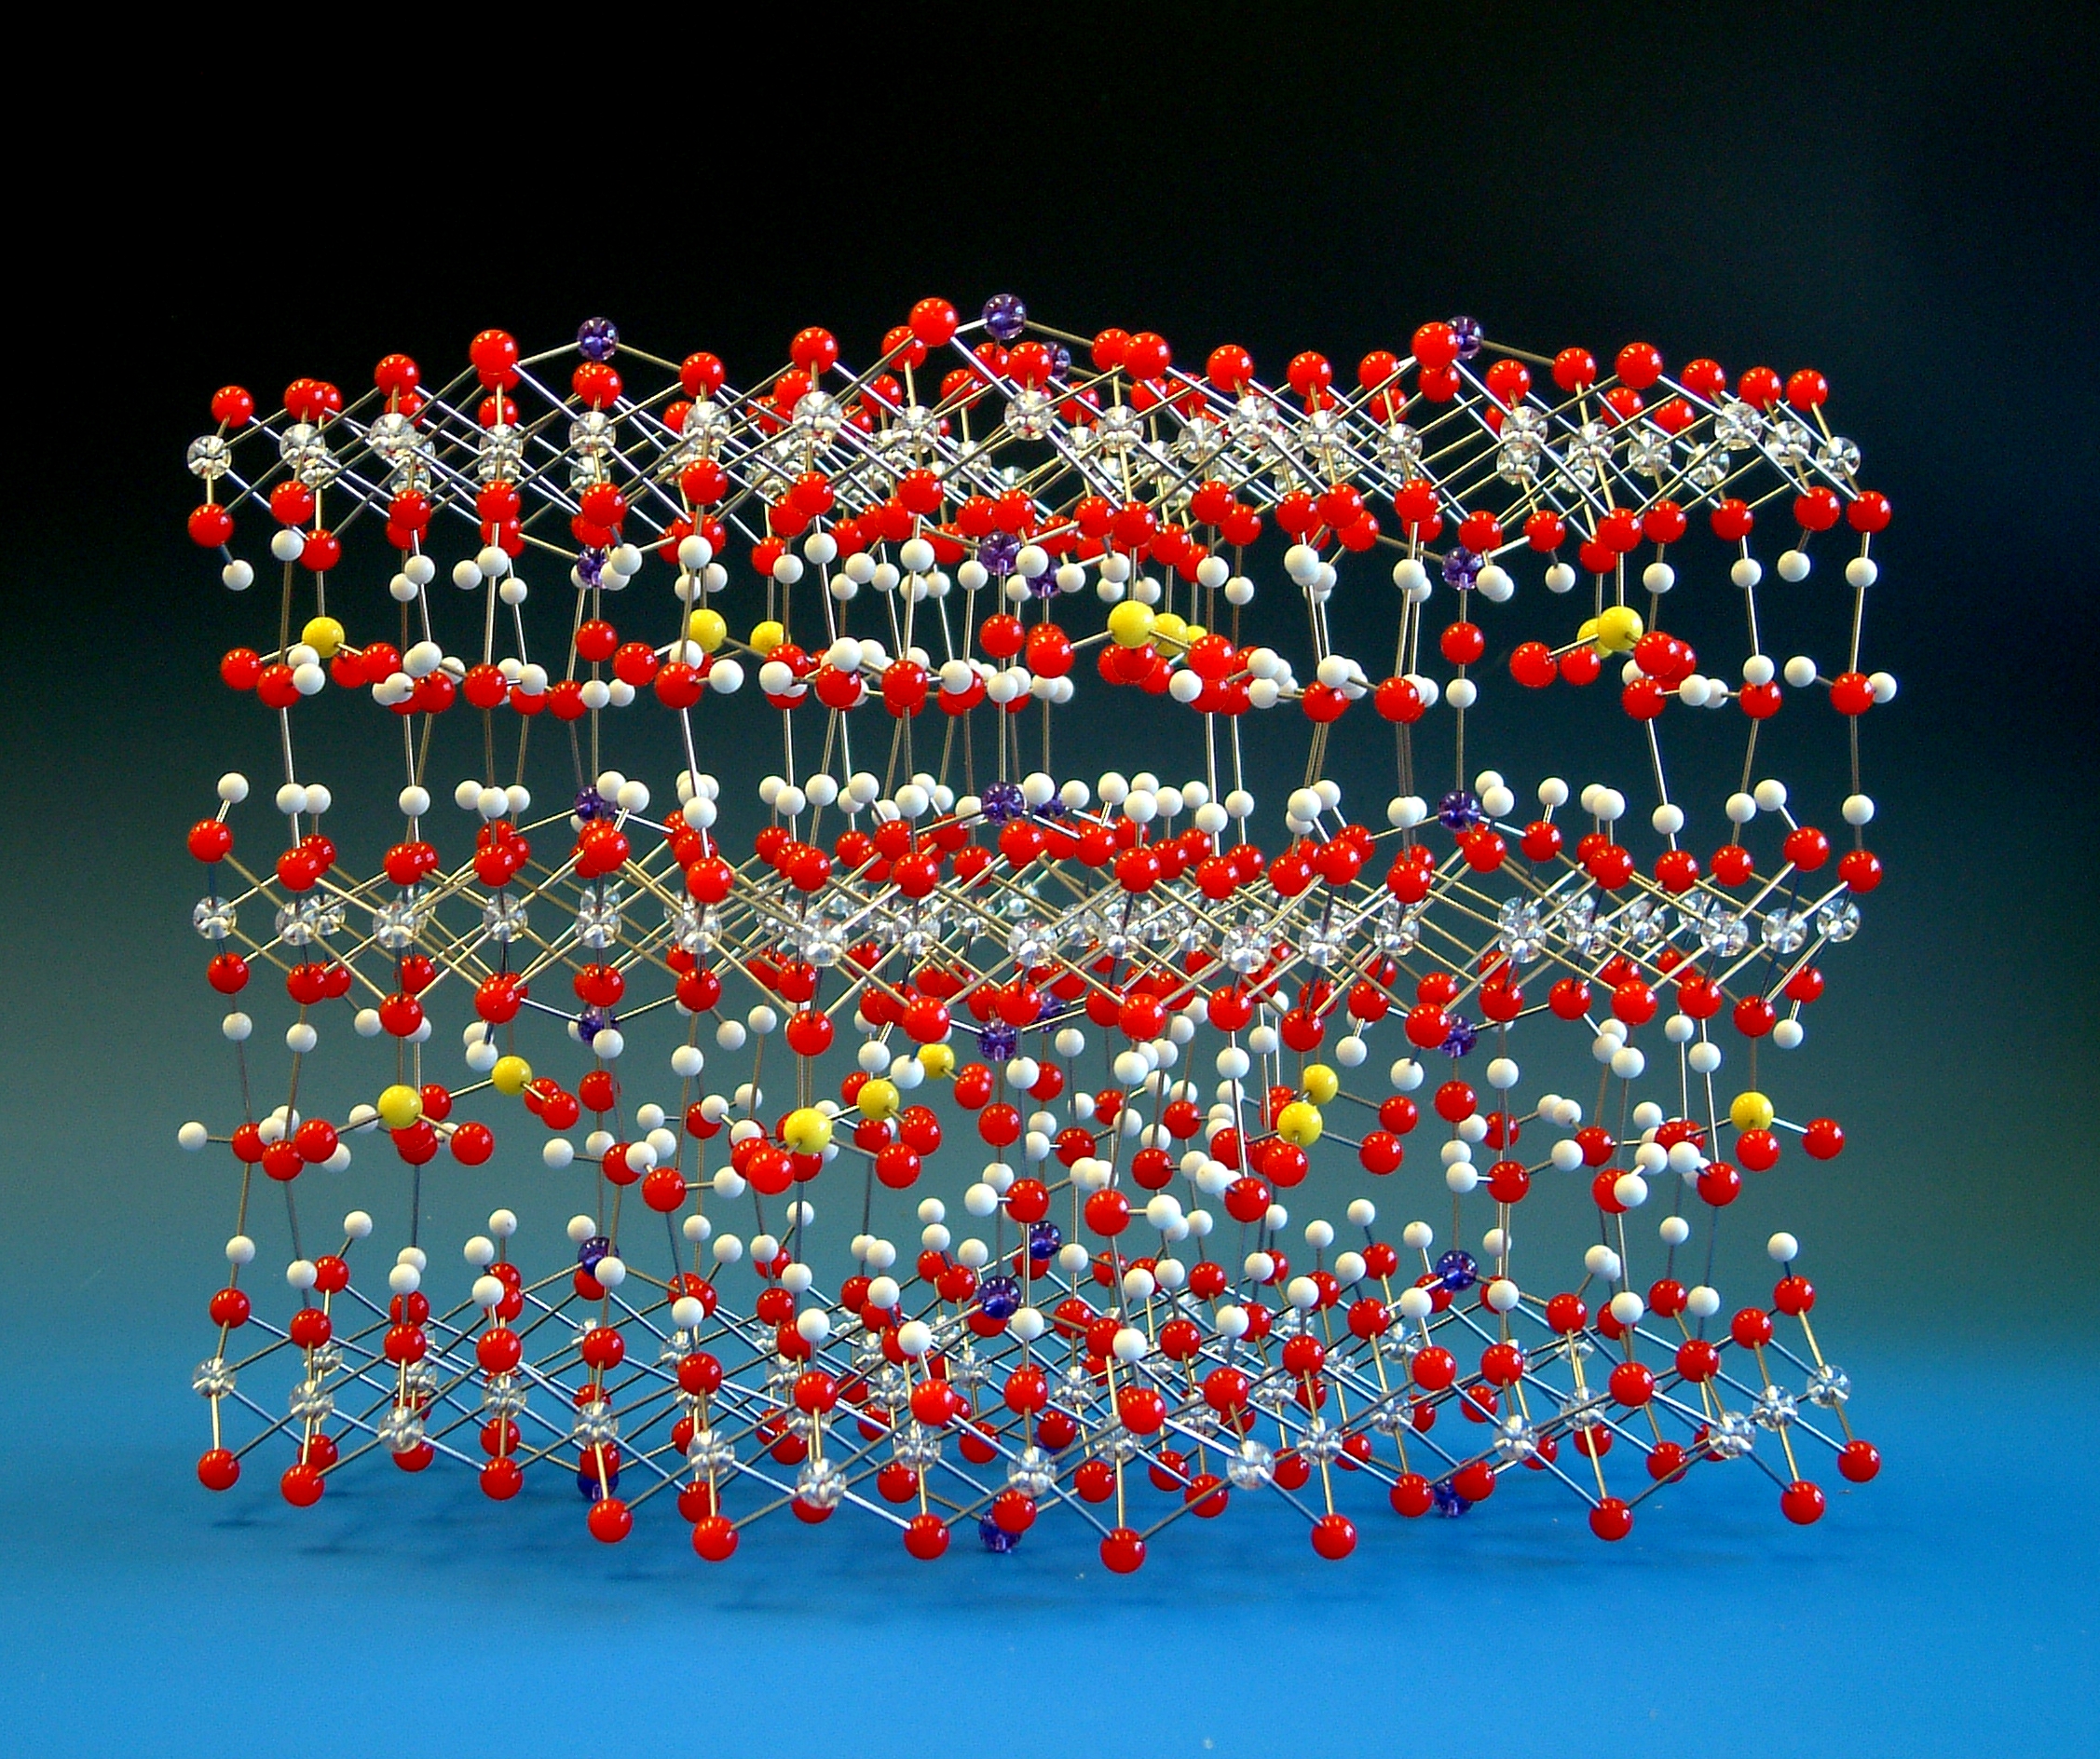 A crystal structure model of the rare mineral Bechererite